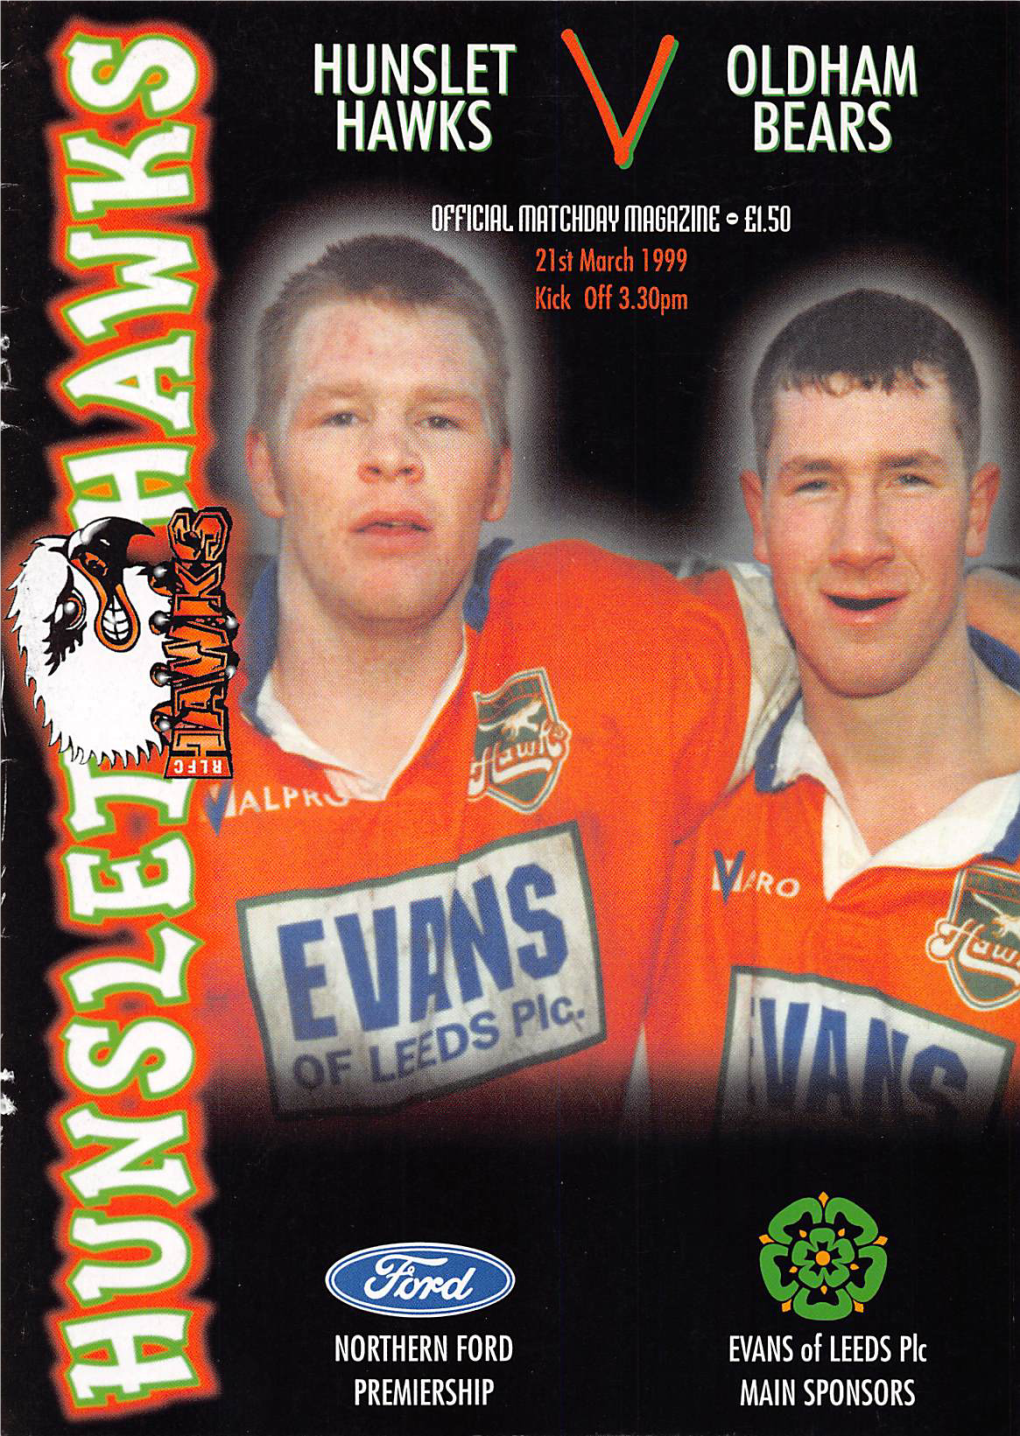 HUNSLET OLDHAM HAWKS V BEARS Officialmﬂtchdﬂvdlﬂgﬂzineo £1.50 21St March 1999 Kickoff 3.30Pm